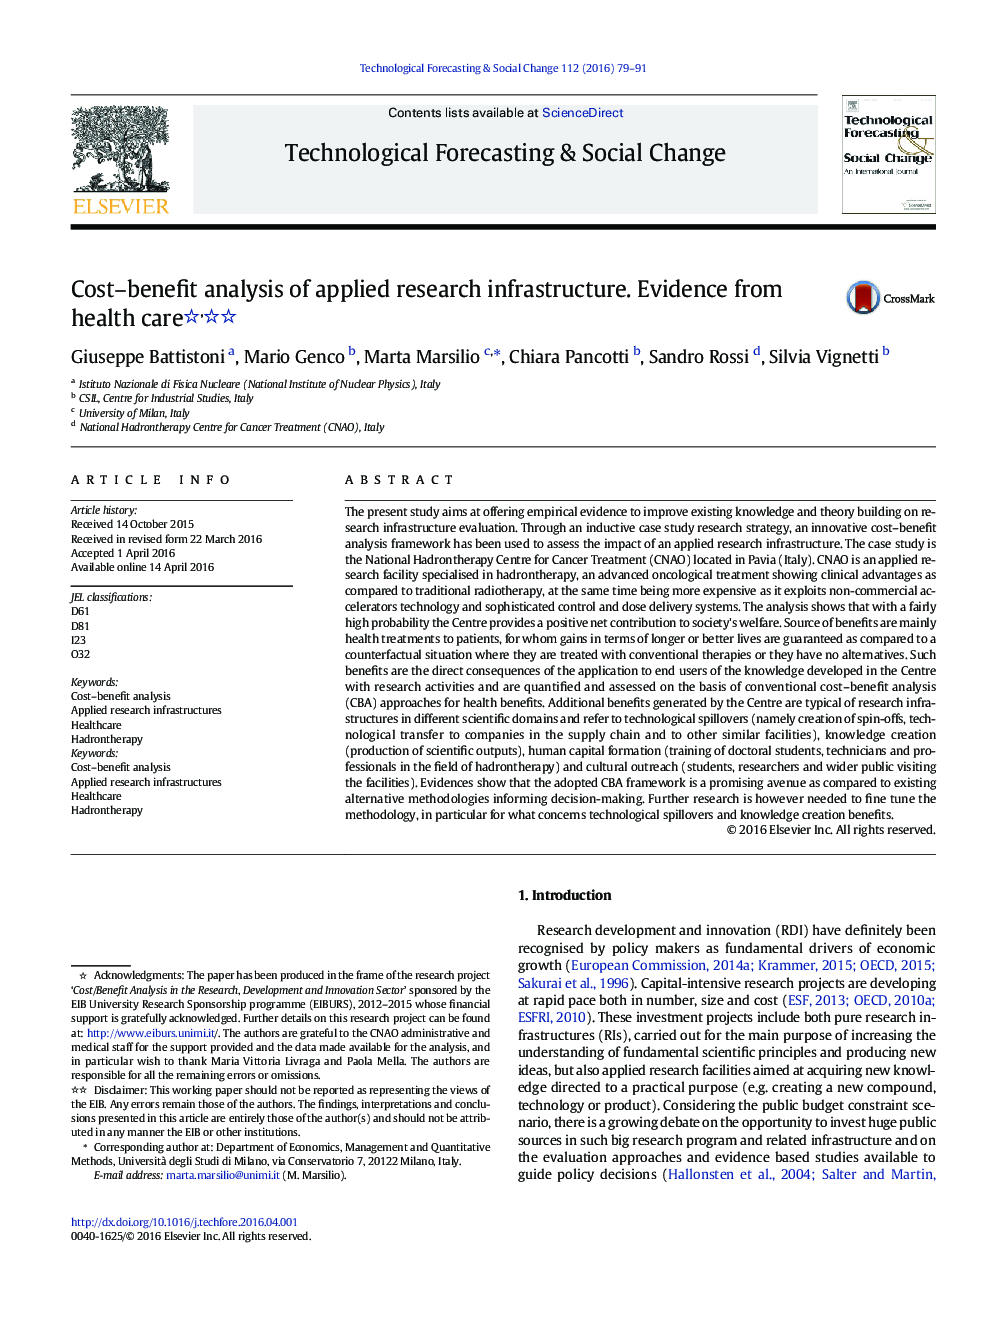 Cost-benefit analysis of applied research infrastructure. Evidence from health care